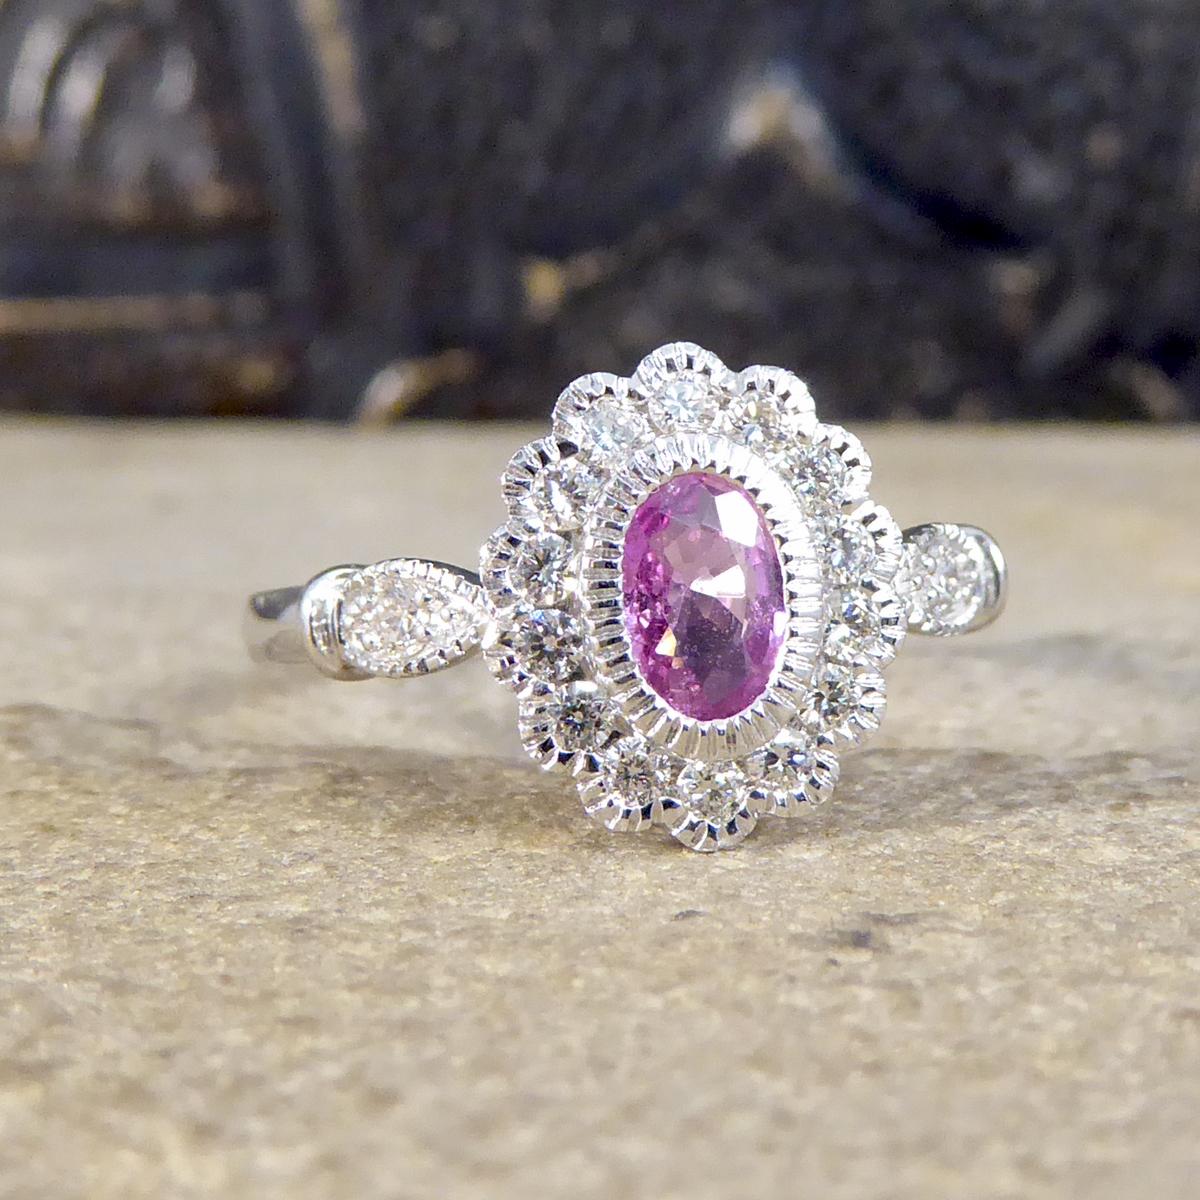 This pretty pink Sapphire centre weighs 0.40ct and is an Oval cut gemstone. It has a surround of Diamonds weighing 0.25ct in total of modern brilliant cut Diamonds that are clear and bright. Brand new and never worn, all the gems are set in a rub